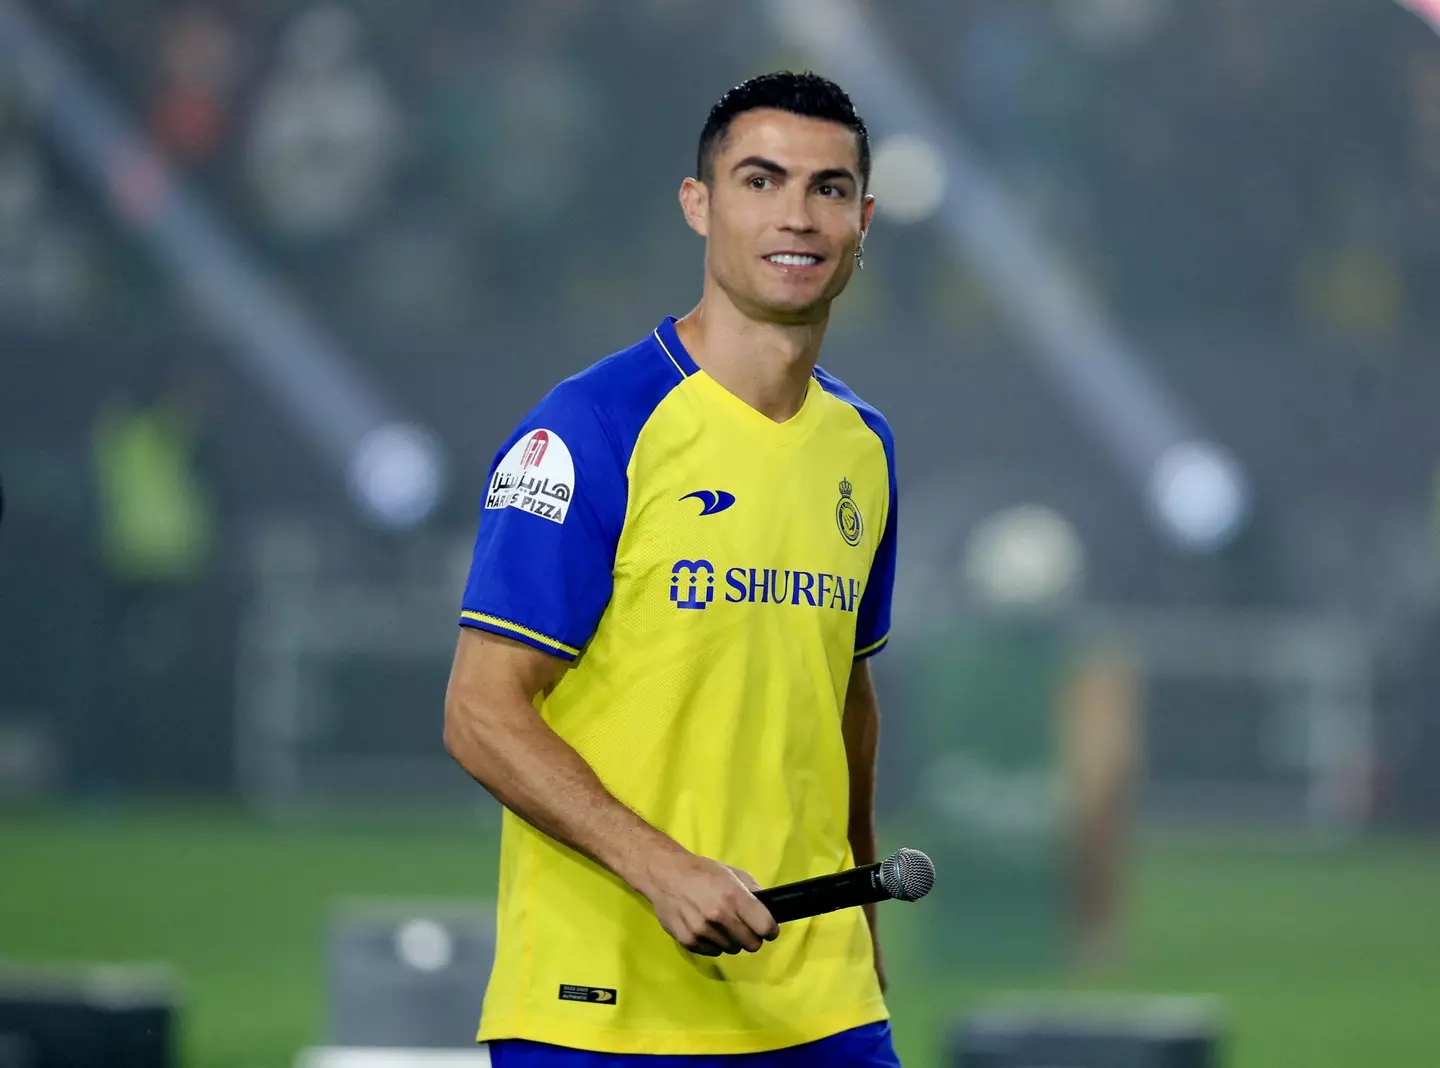 Ronaldo will make his Al Nassr debut later this month. (Image